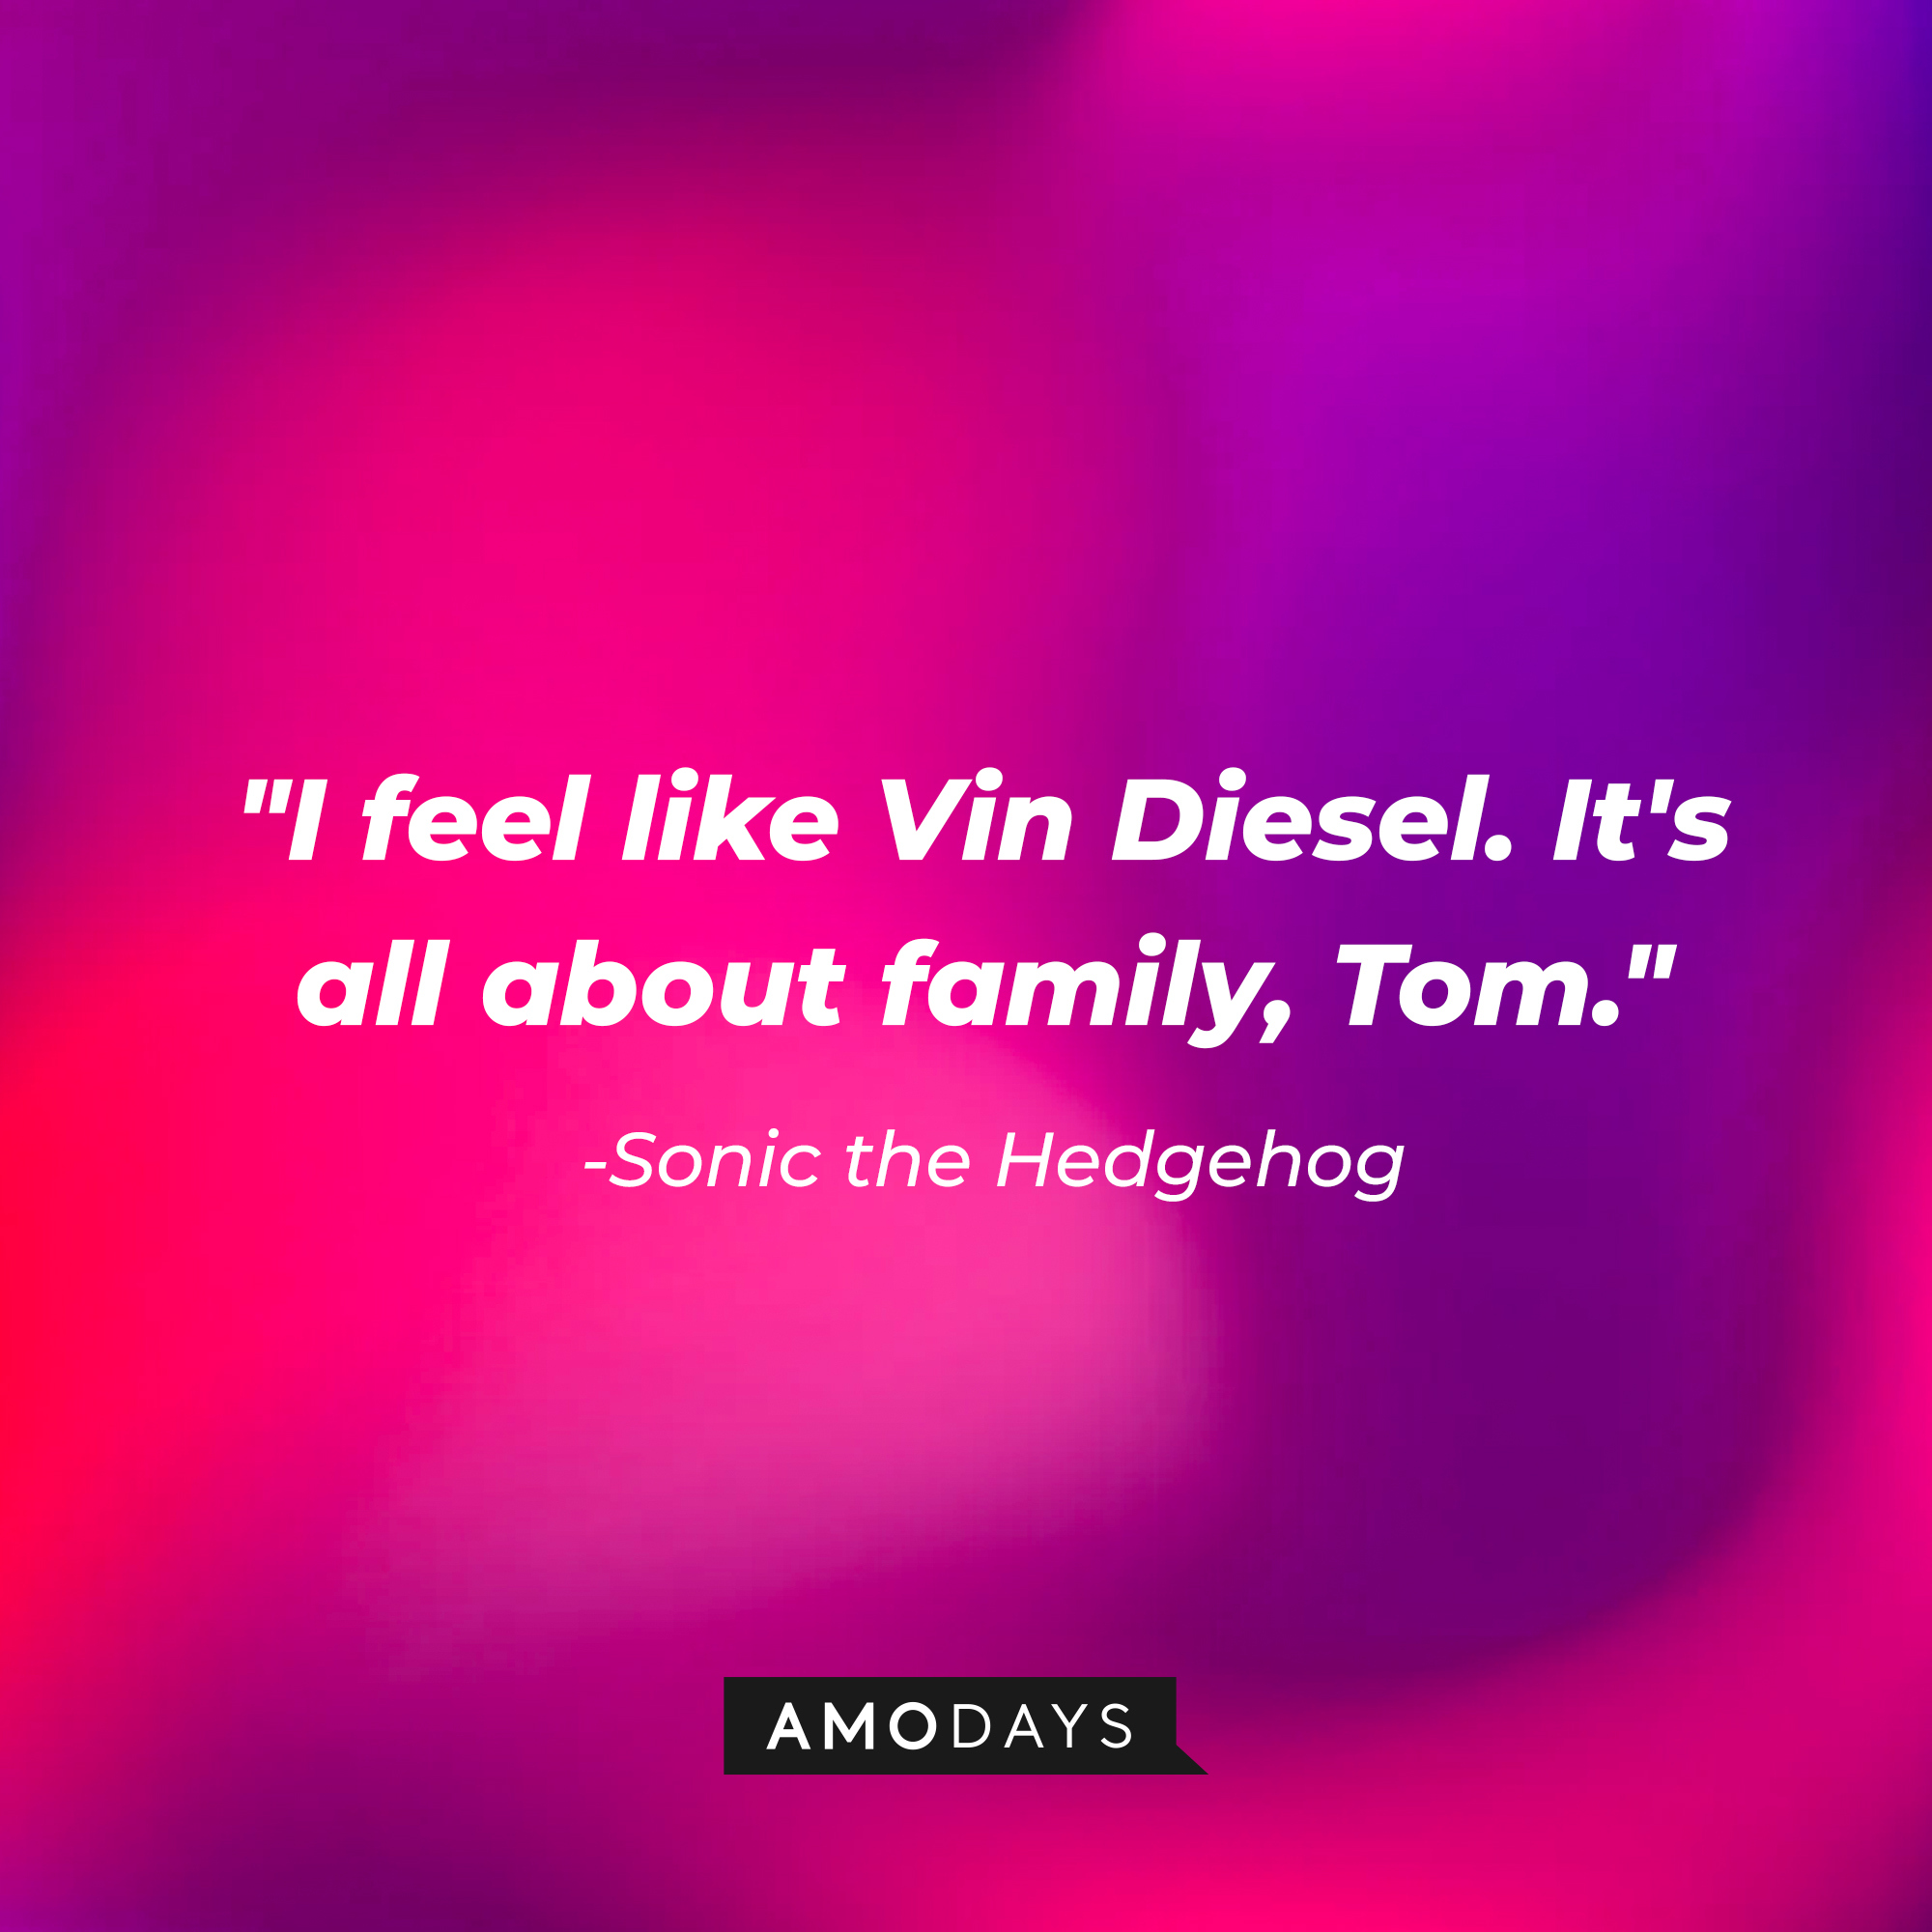 Sonic's quote: "I feel like Vin Diesel. It's all about family, Tom." | Source: Amodays